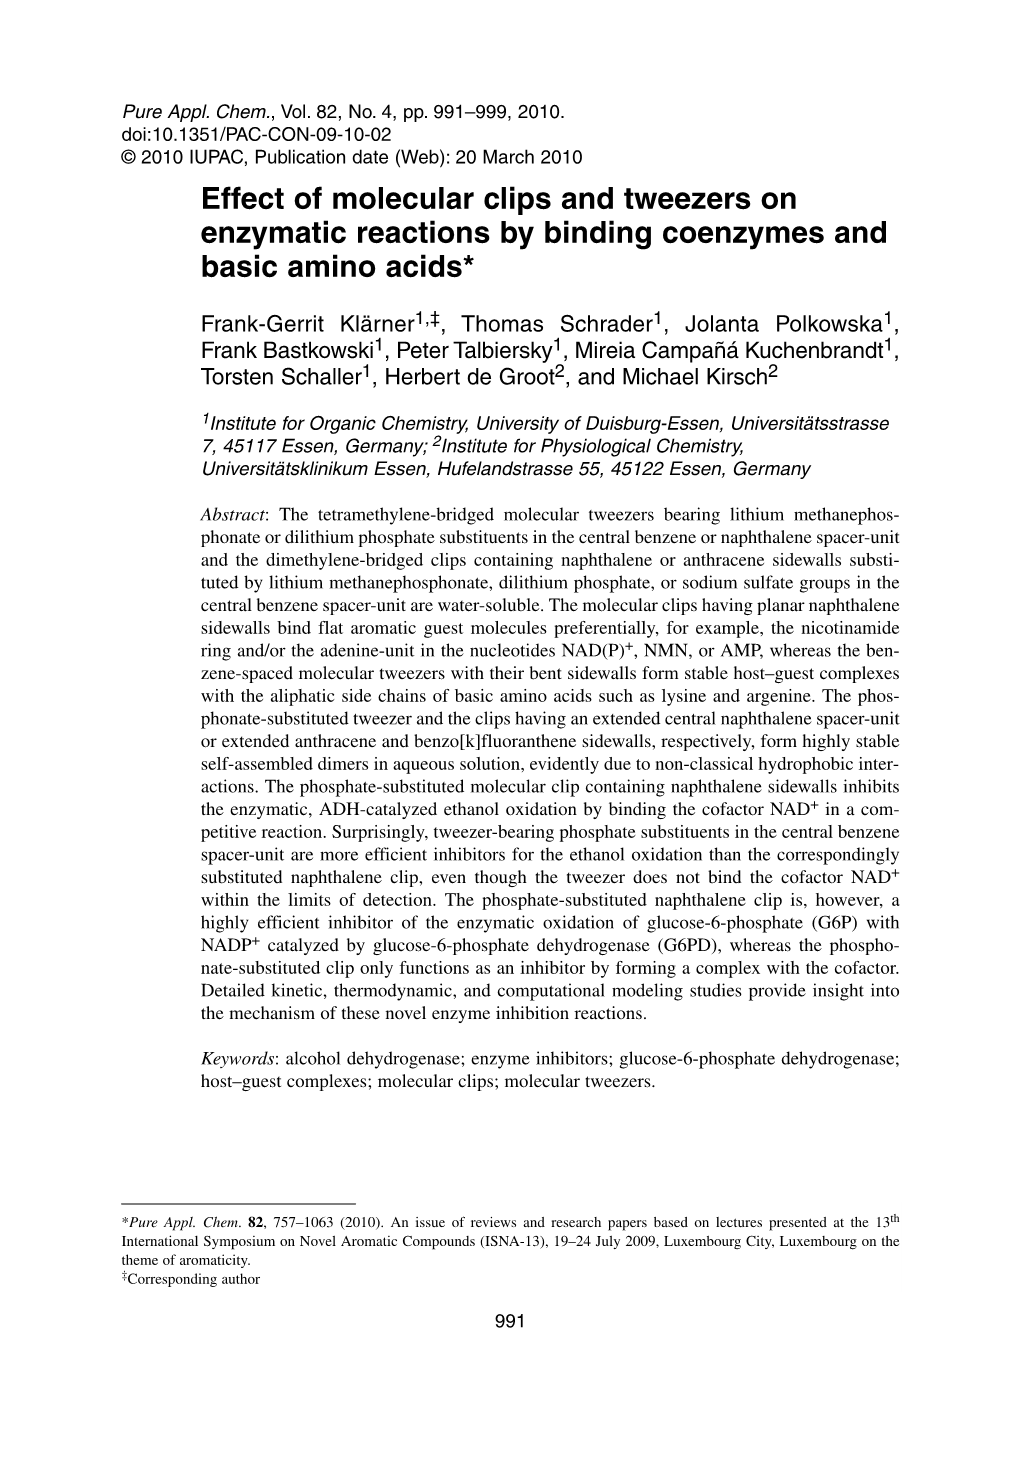 Effect of Molecular Clips and Tweezers on Enzymatic Reactions by Binding Coenzymes and Basic Amino Acids*